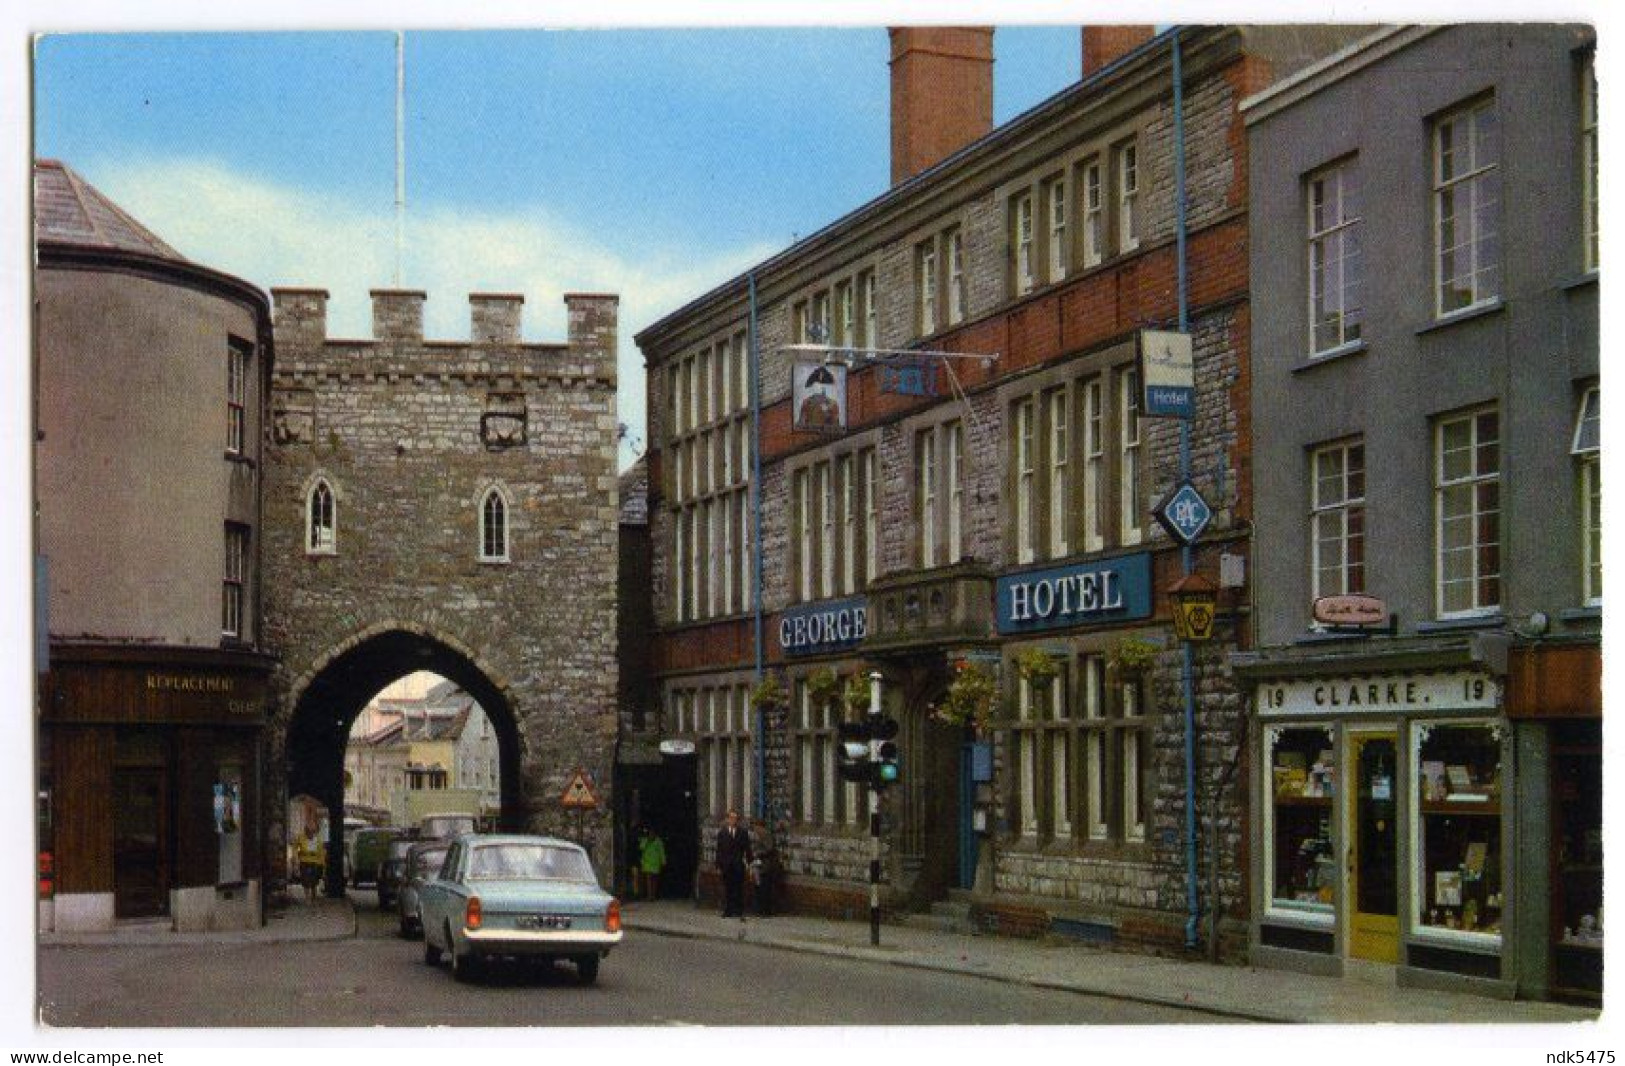 CHEPSTOW : THE WEST GATE, GEORGE HOTEL, CLARKE - Monmouthshire